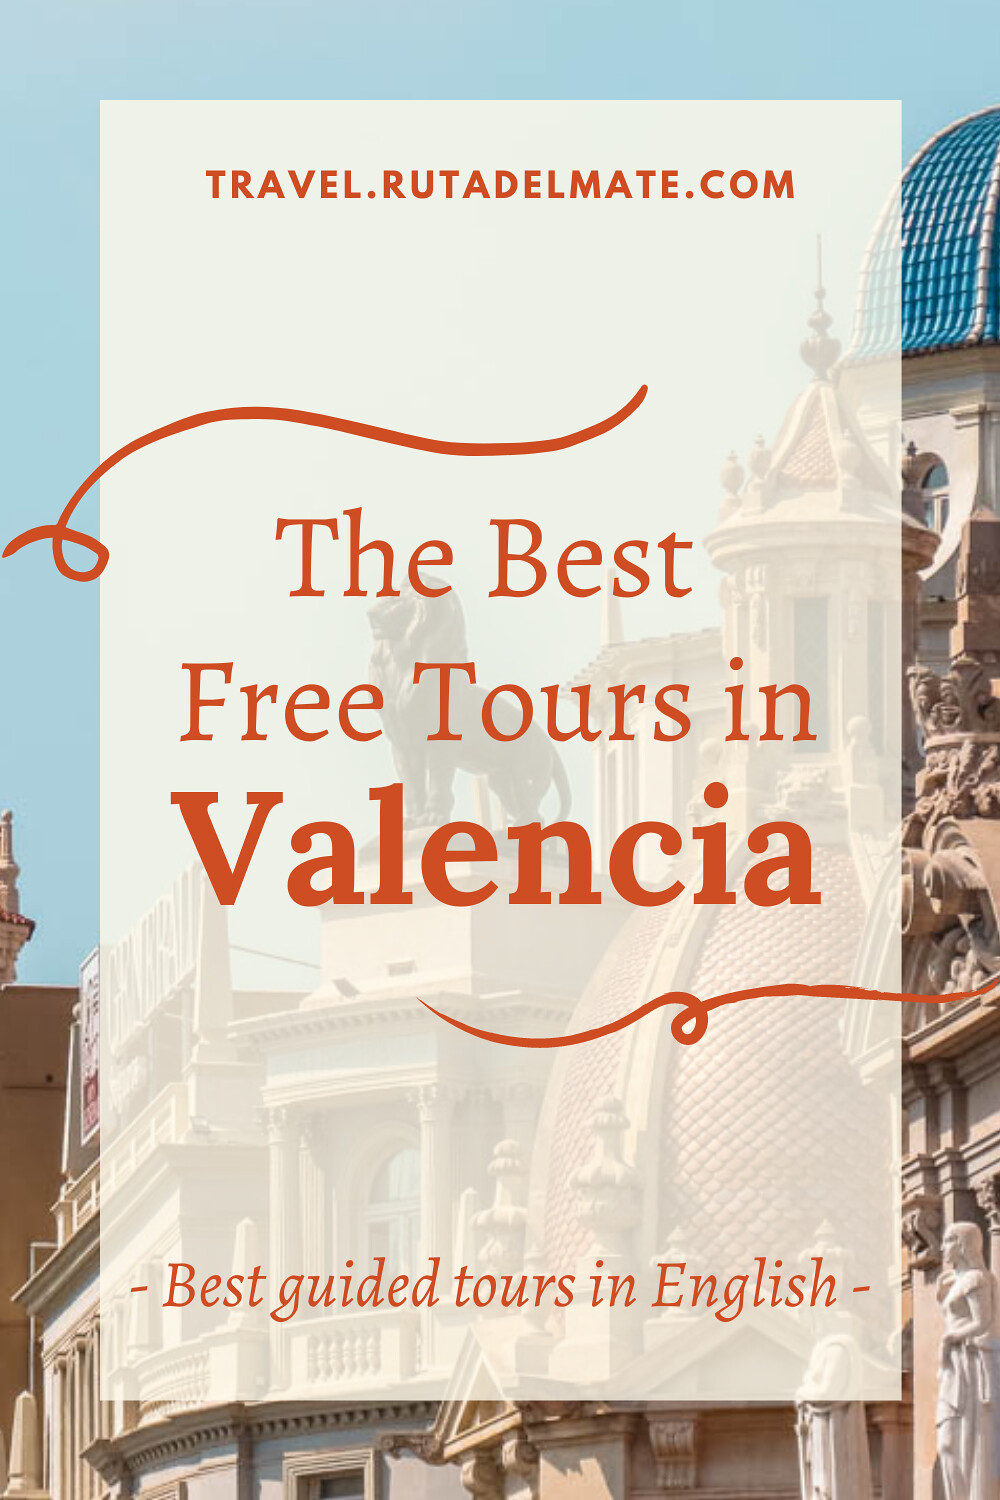 Walking Tours in Valencia, best free guided visits